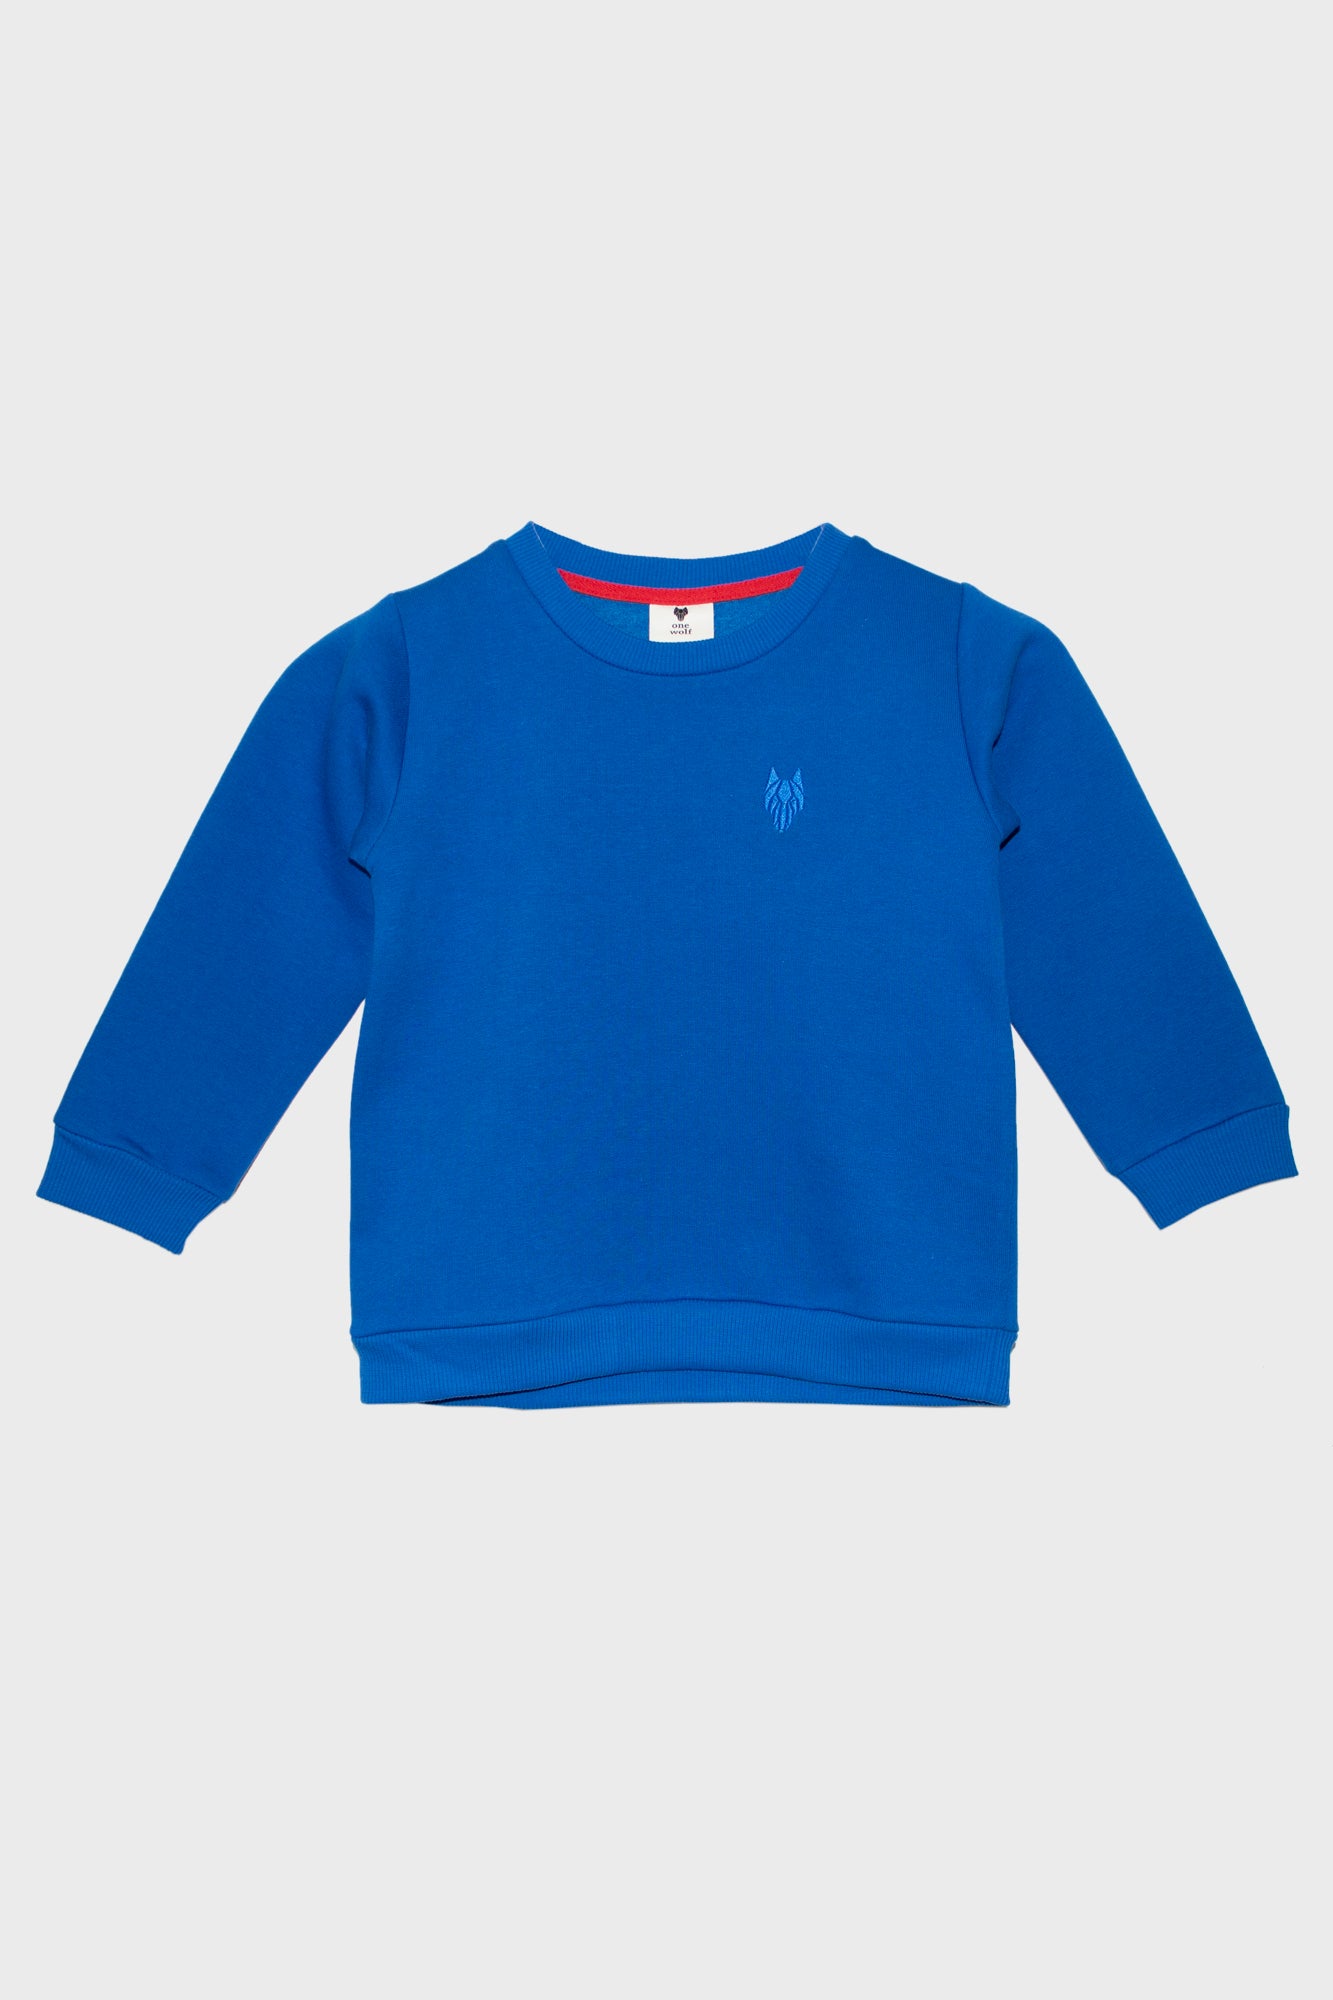 Kid’s One Wolf sweater, blue with blue logo